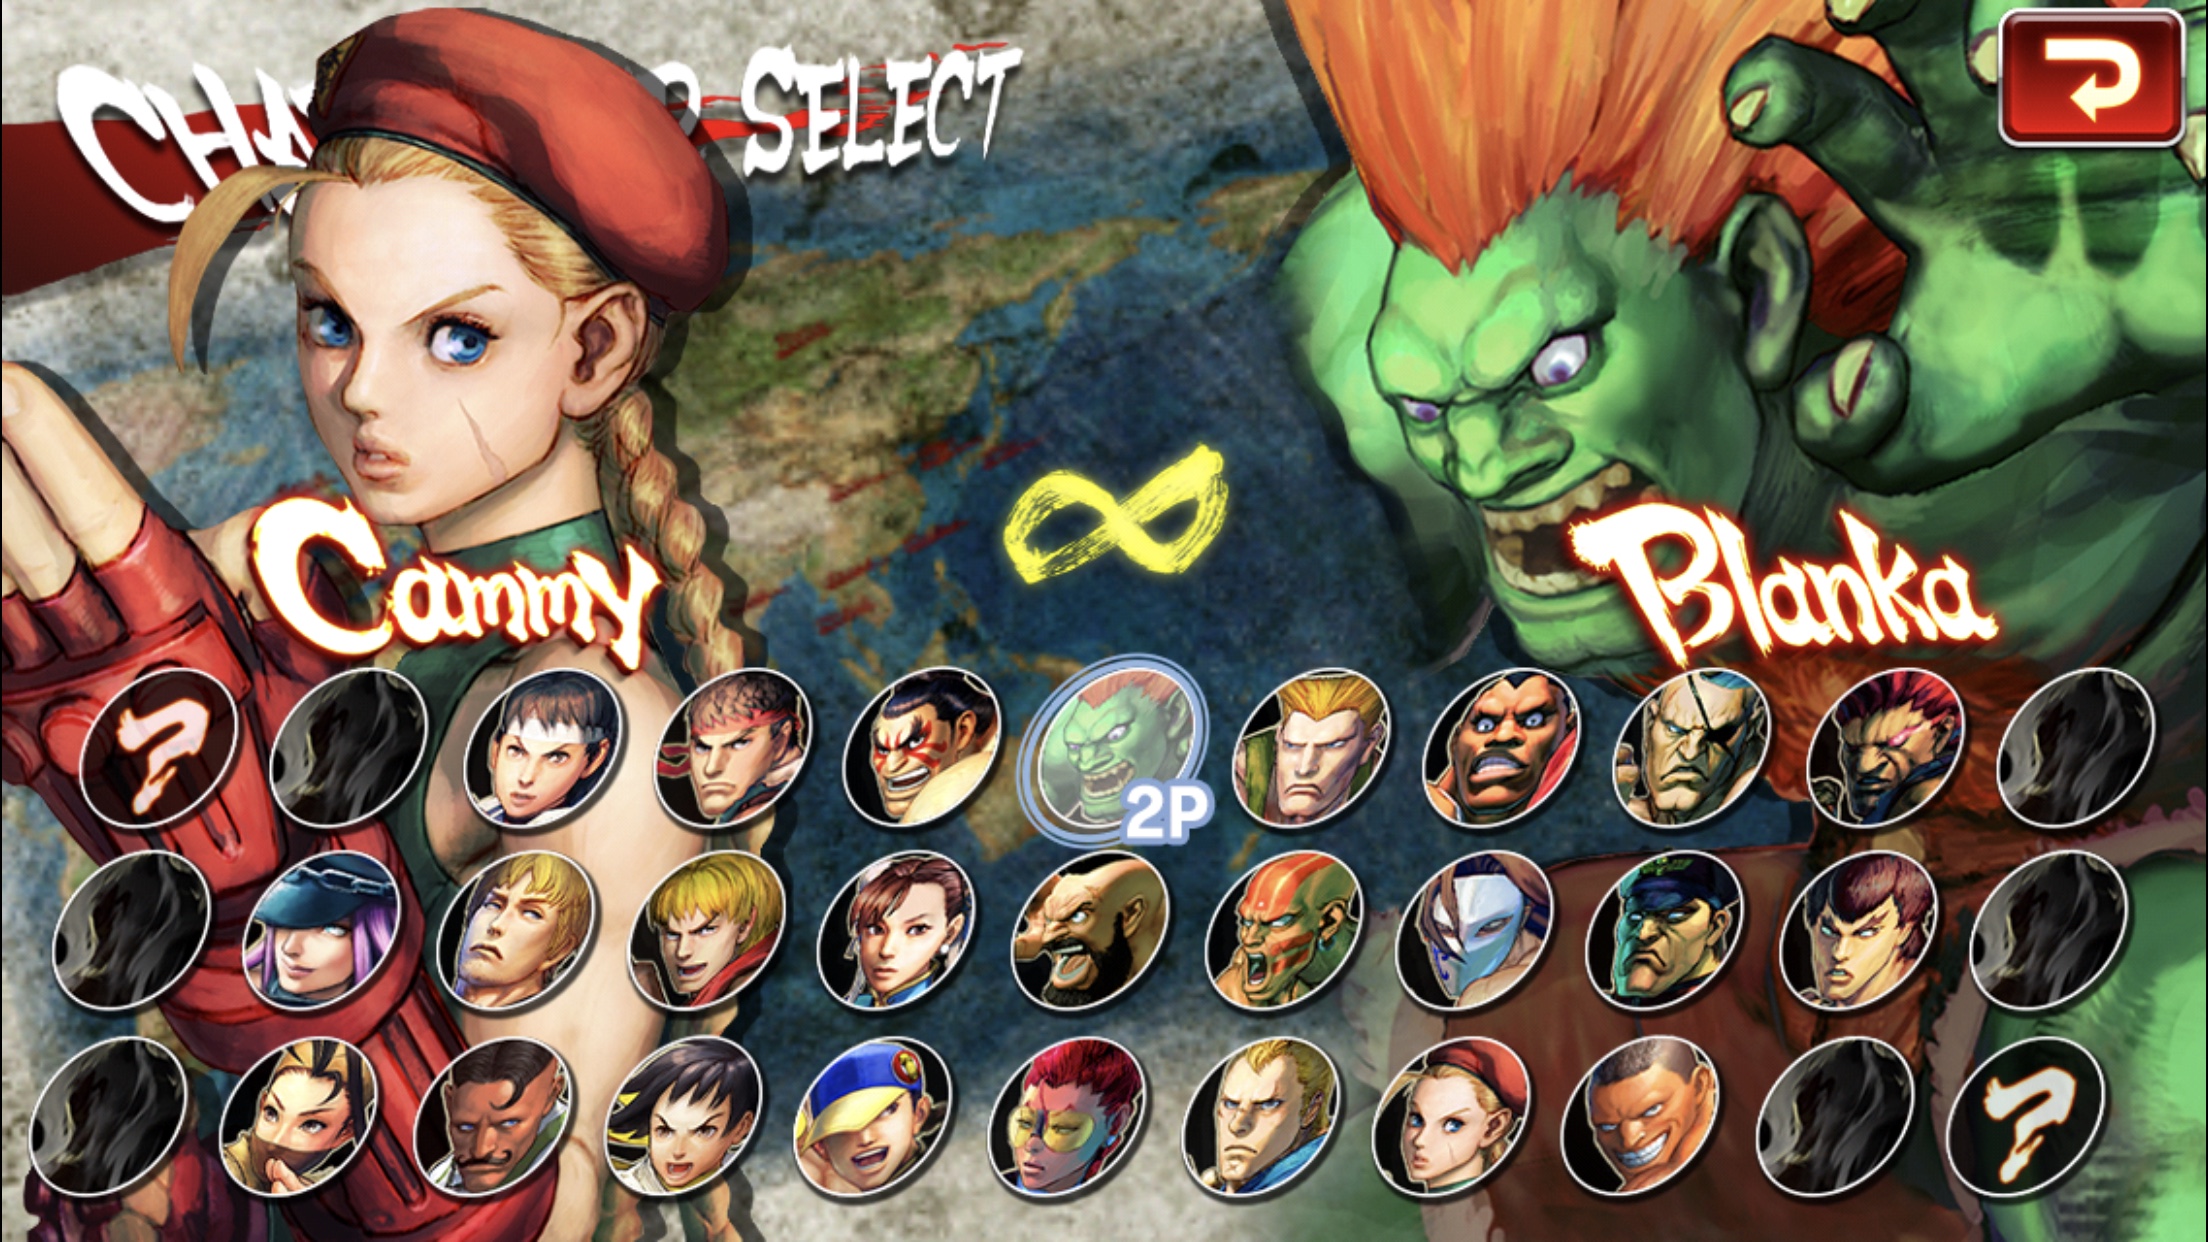 Street Fighter IV: Champion Edition' Now Available on Android